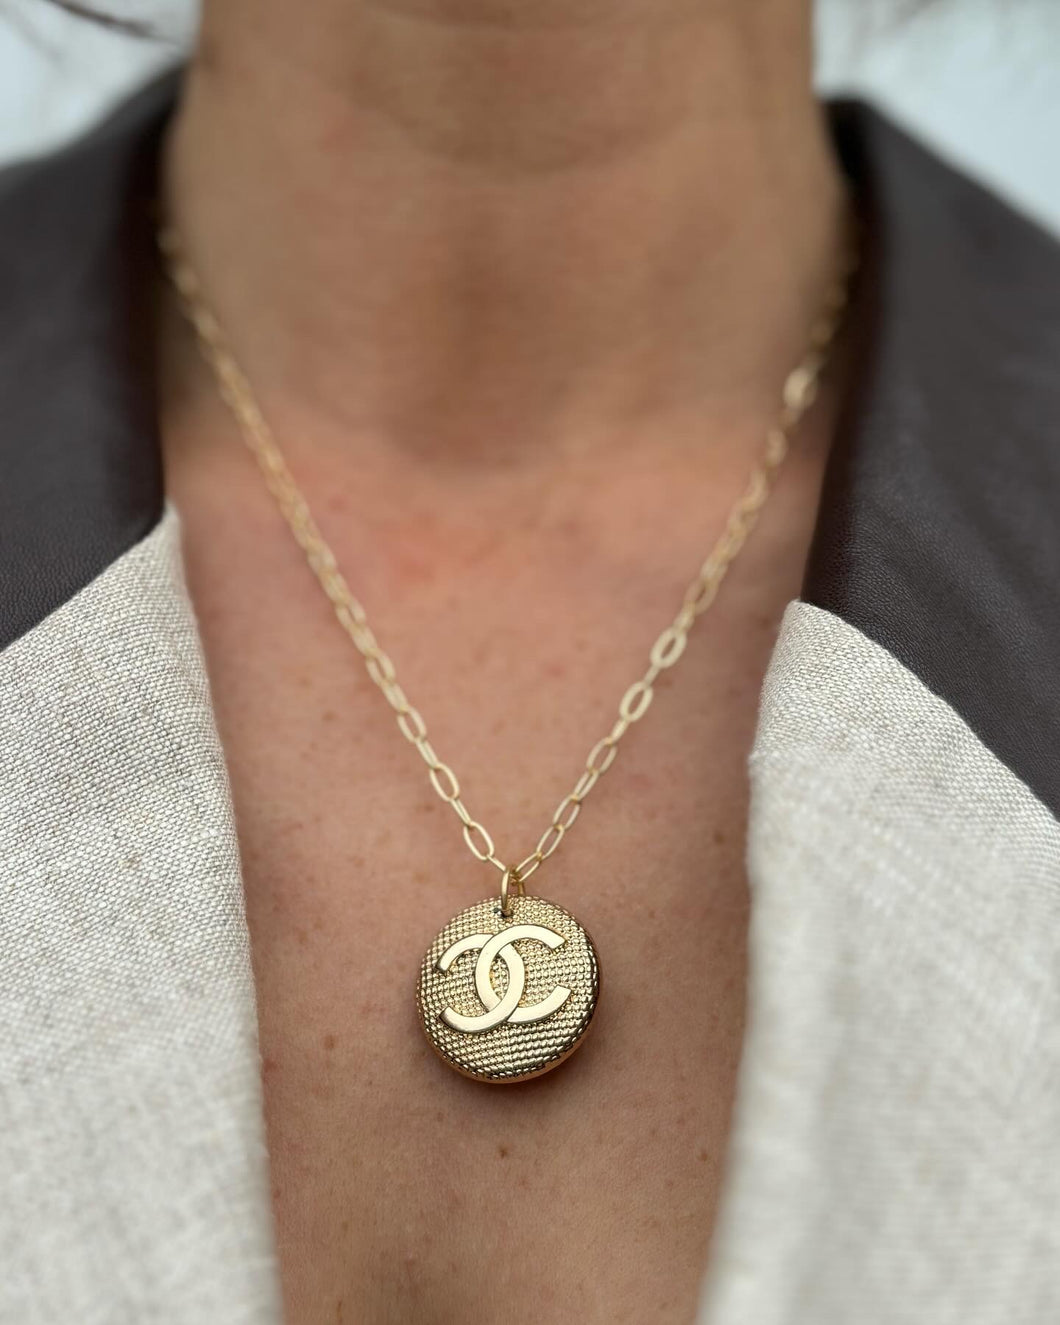 Authentic Vintage Chanel Button on a Chain